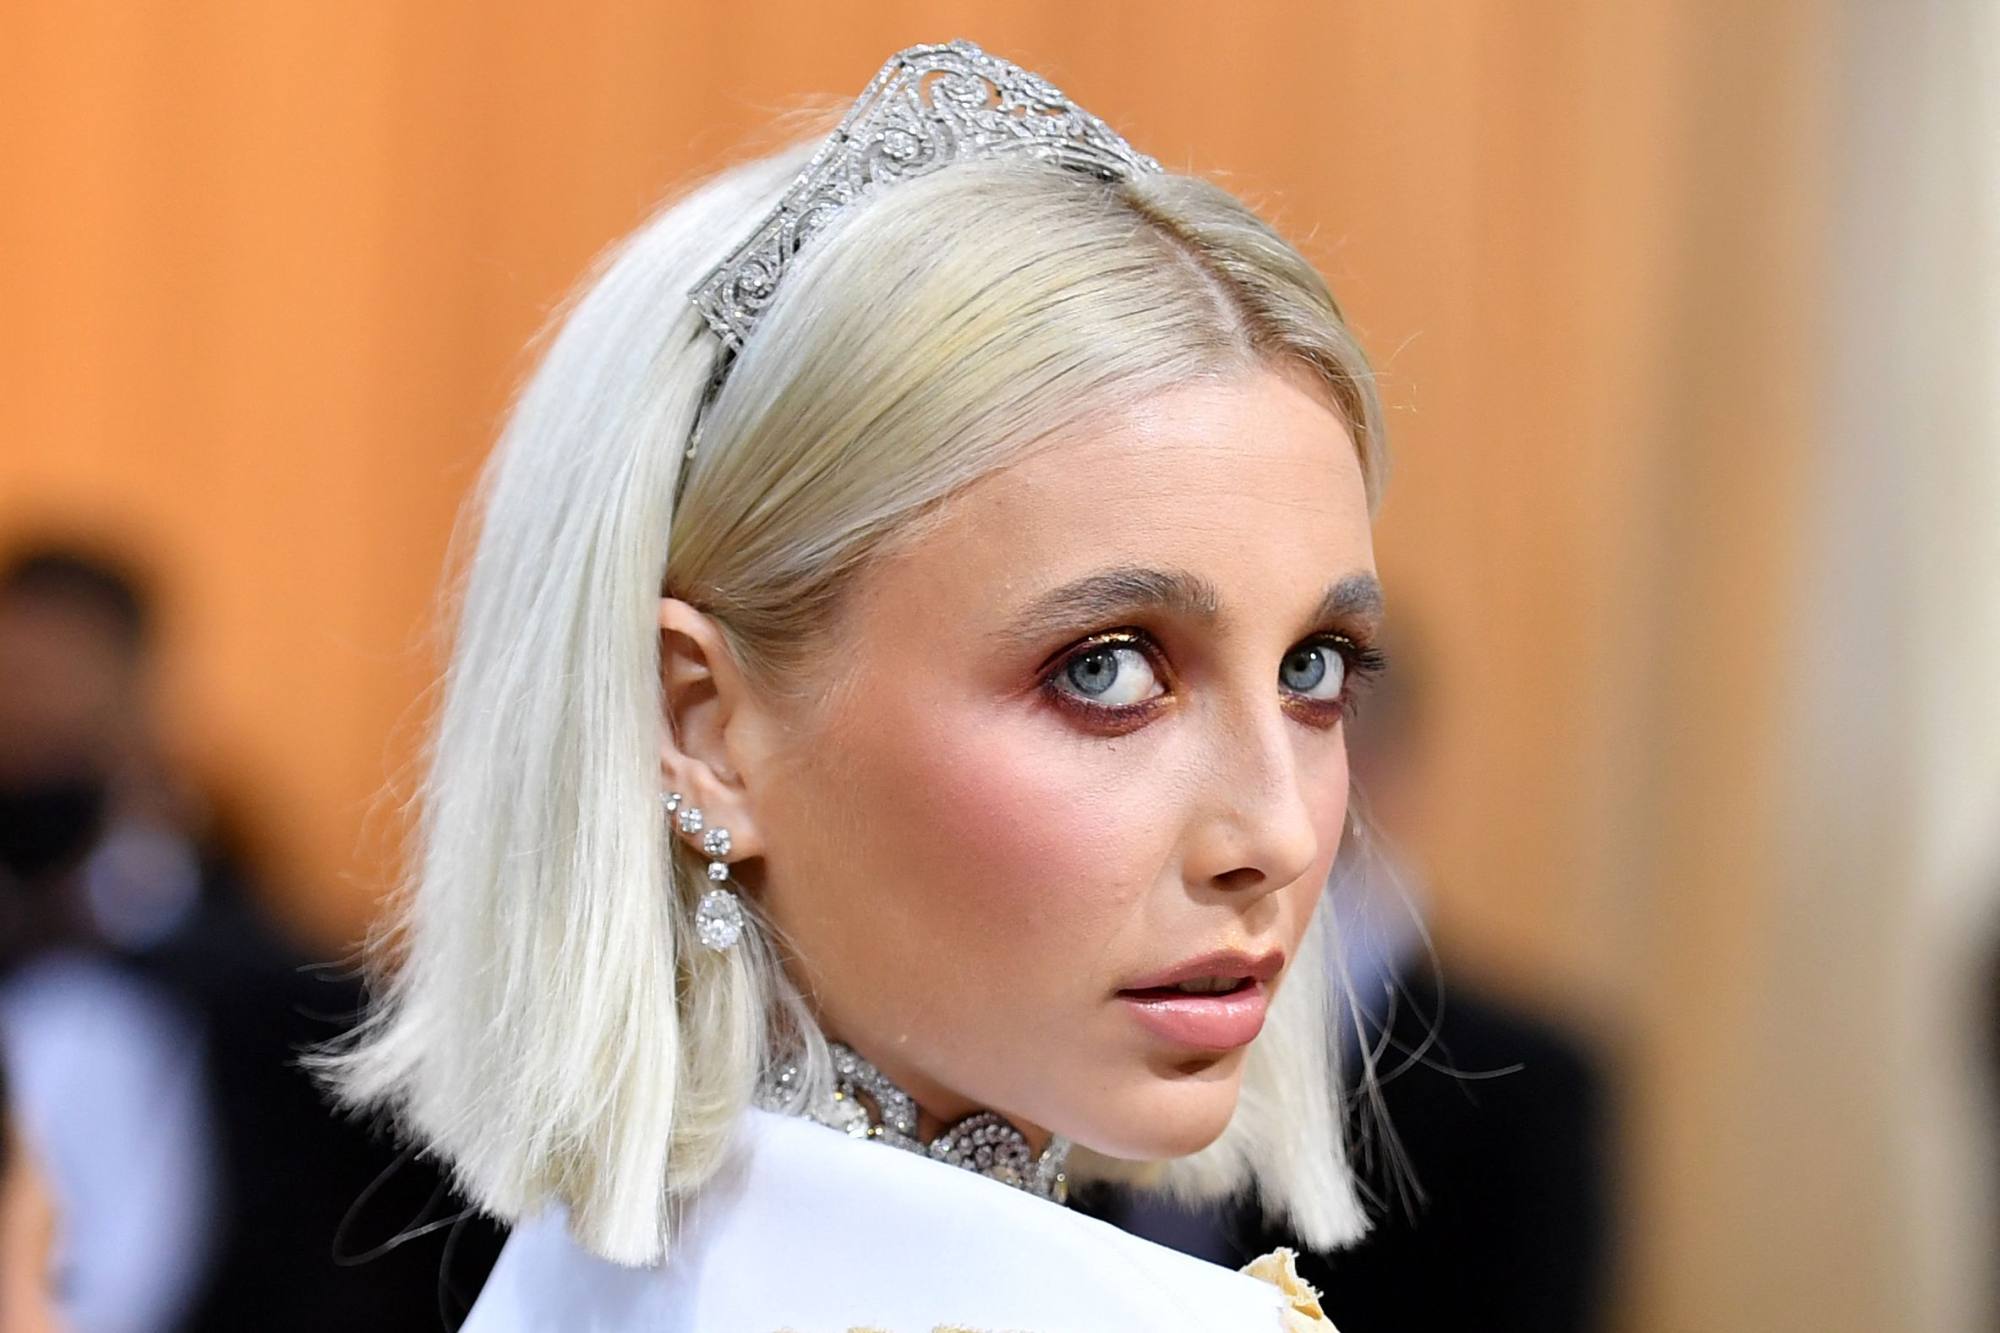 YouTuber and influencer Emma Chamberlain has just been named Cartier’s new ambassador, wearing jewels from the brand at the Met Gala, on May 2, in New York. Photo: AFP